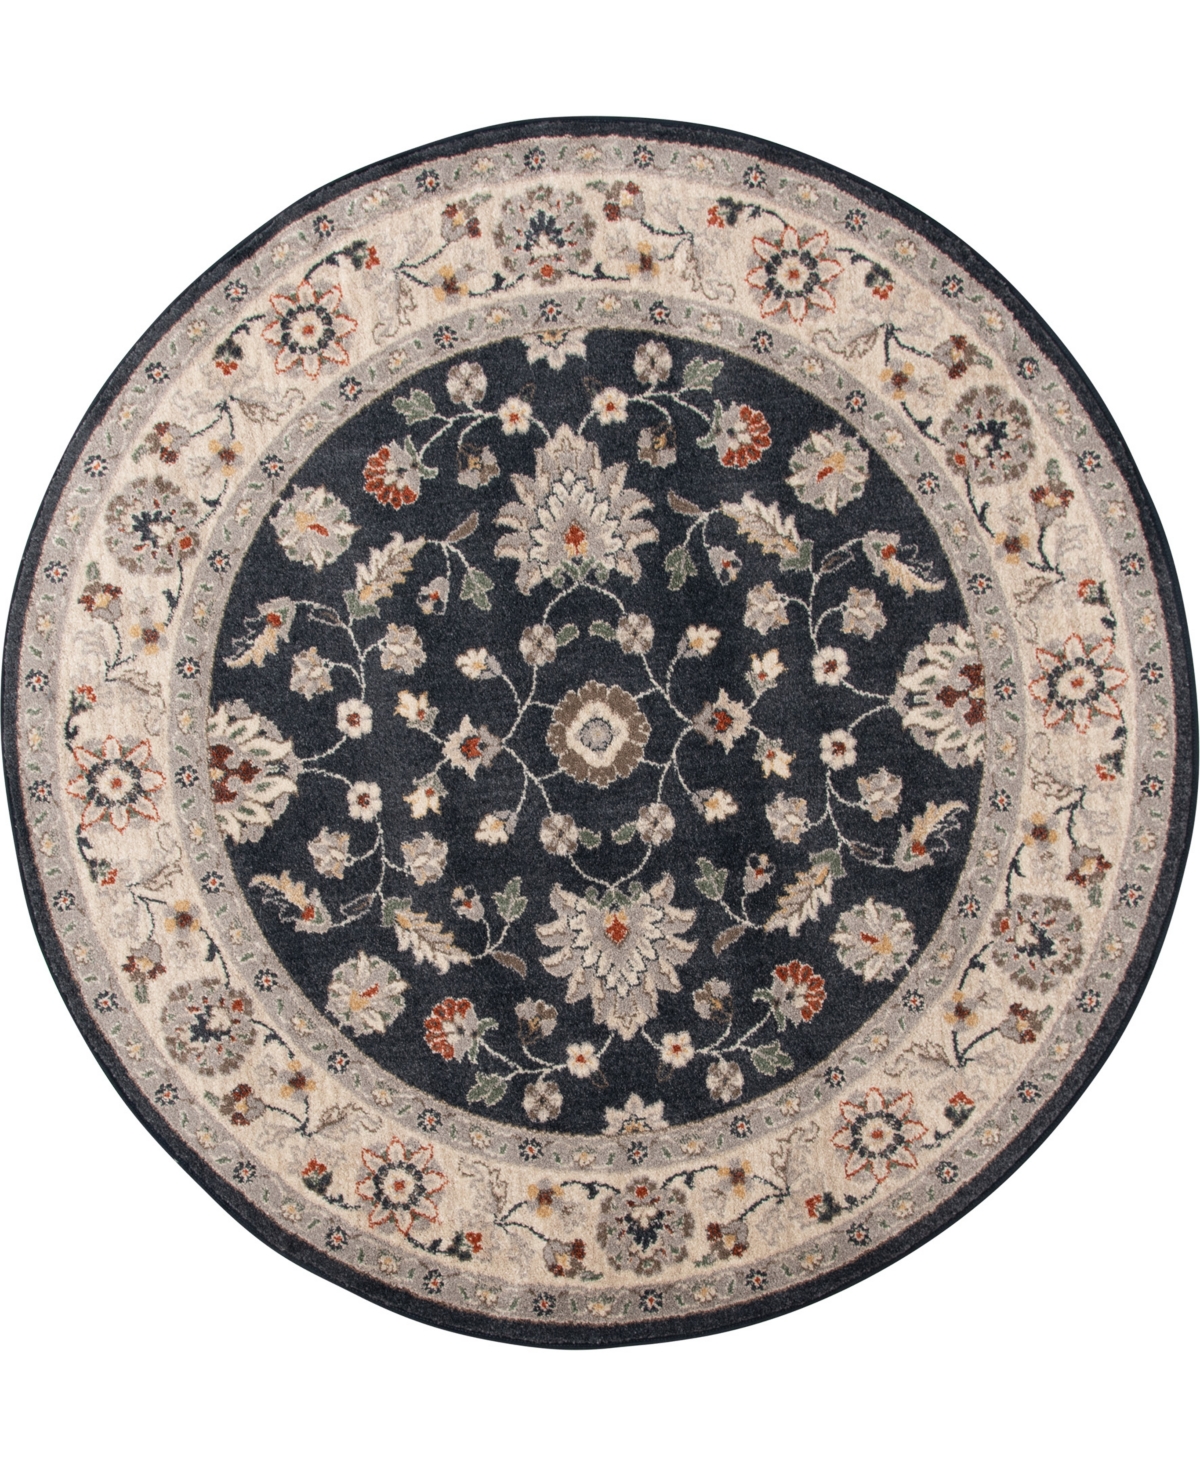 Km Home Poise Pse-7203 5'3" X 5'3" Round Area Rug In Blue